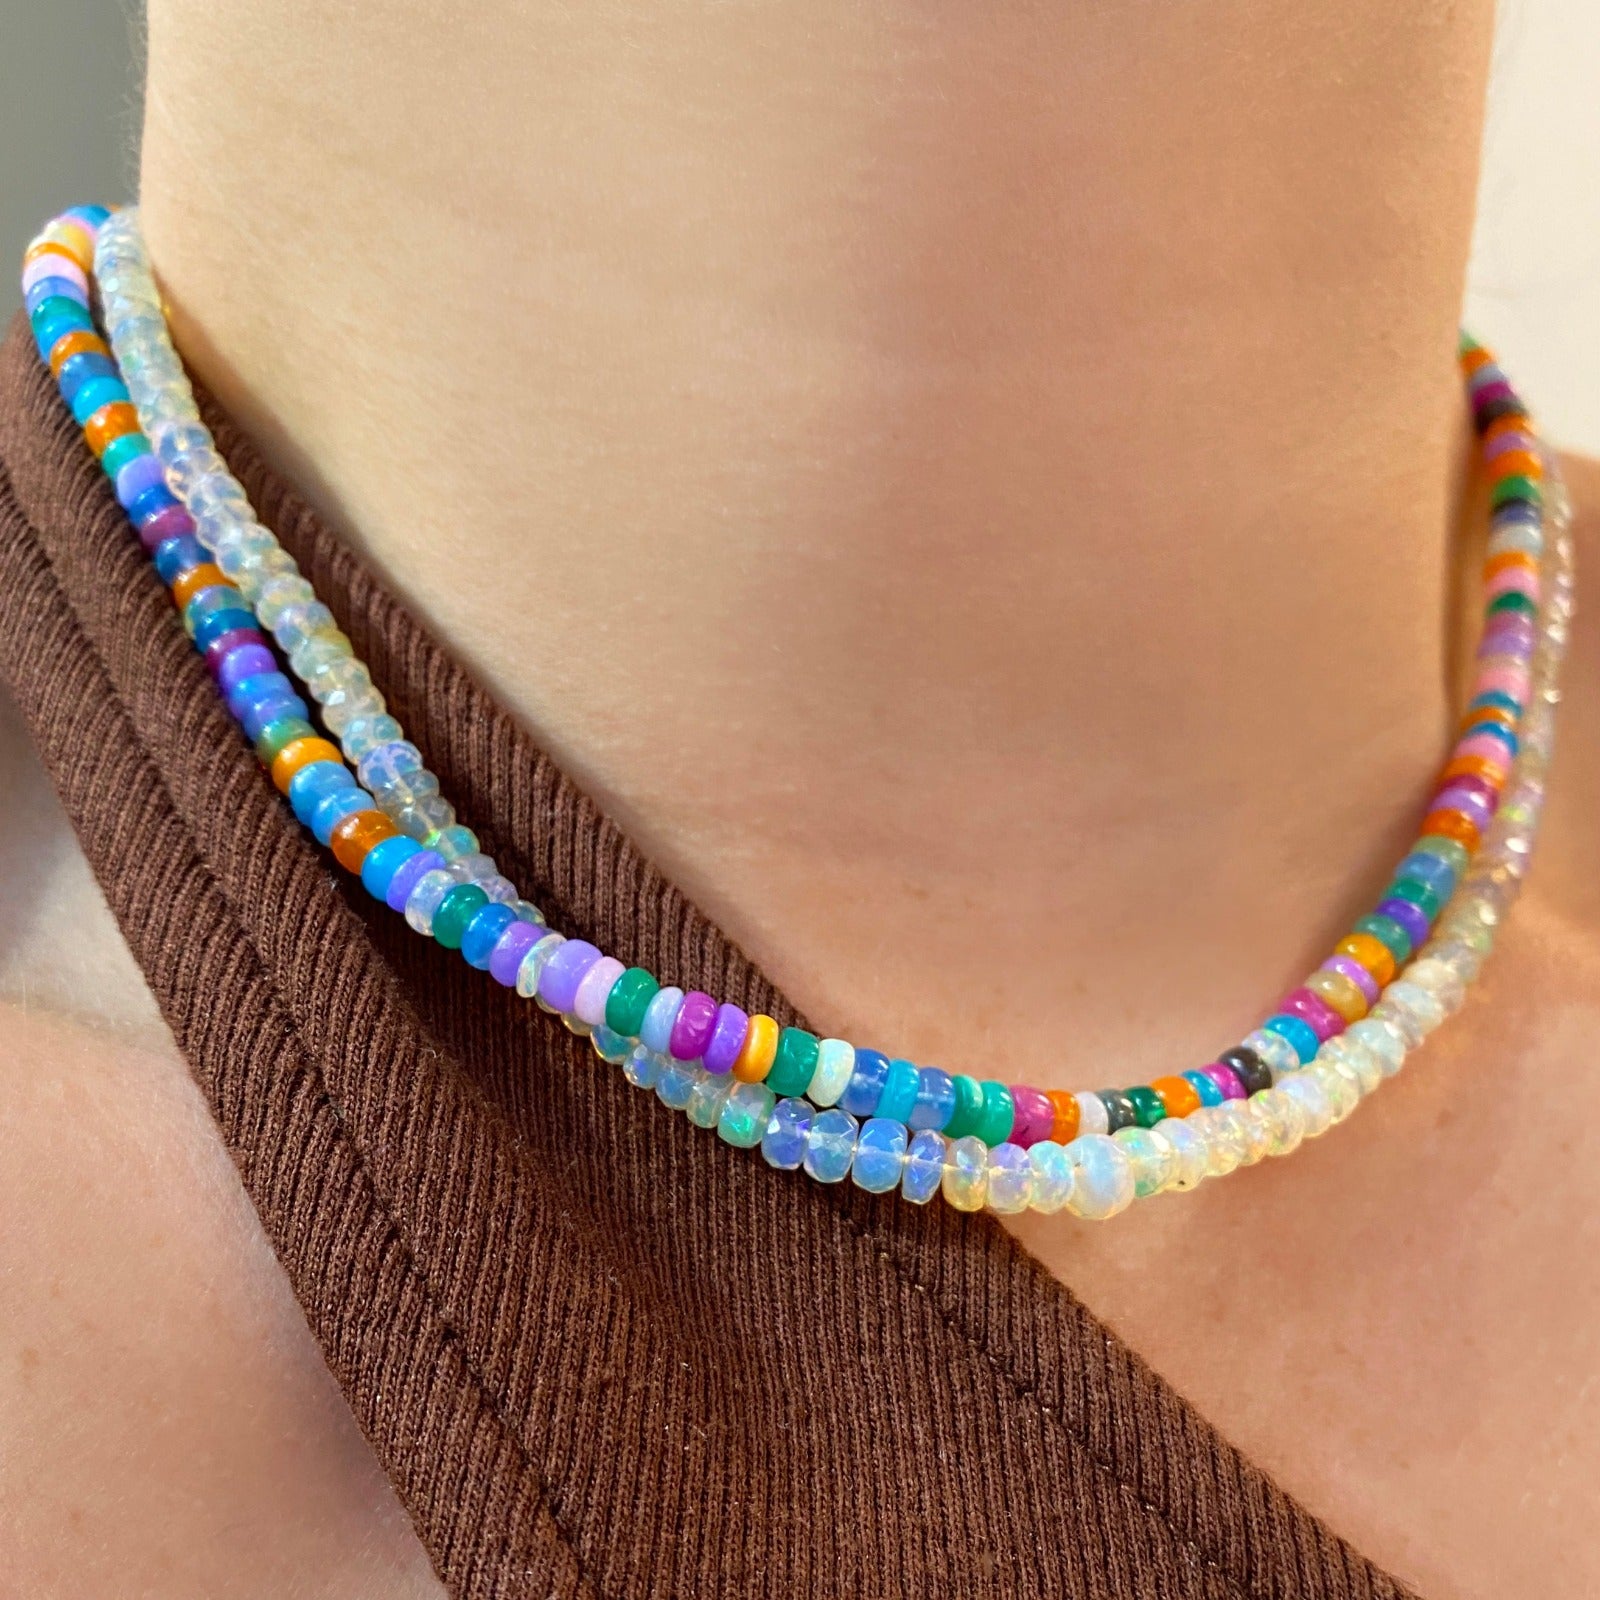 Shimmering beaded necklace made of smooth opal rondels in shades of fiery blues, hot pink, teal, and orange on a slim gold oval clasp. 